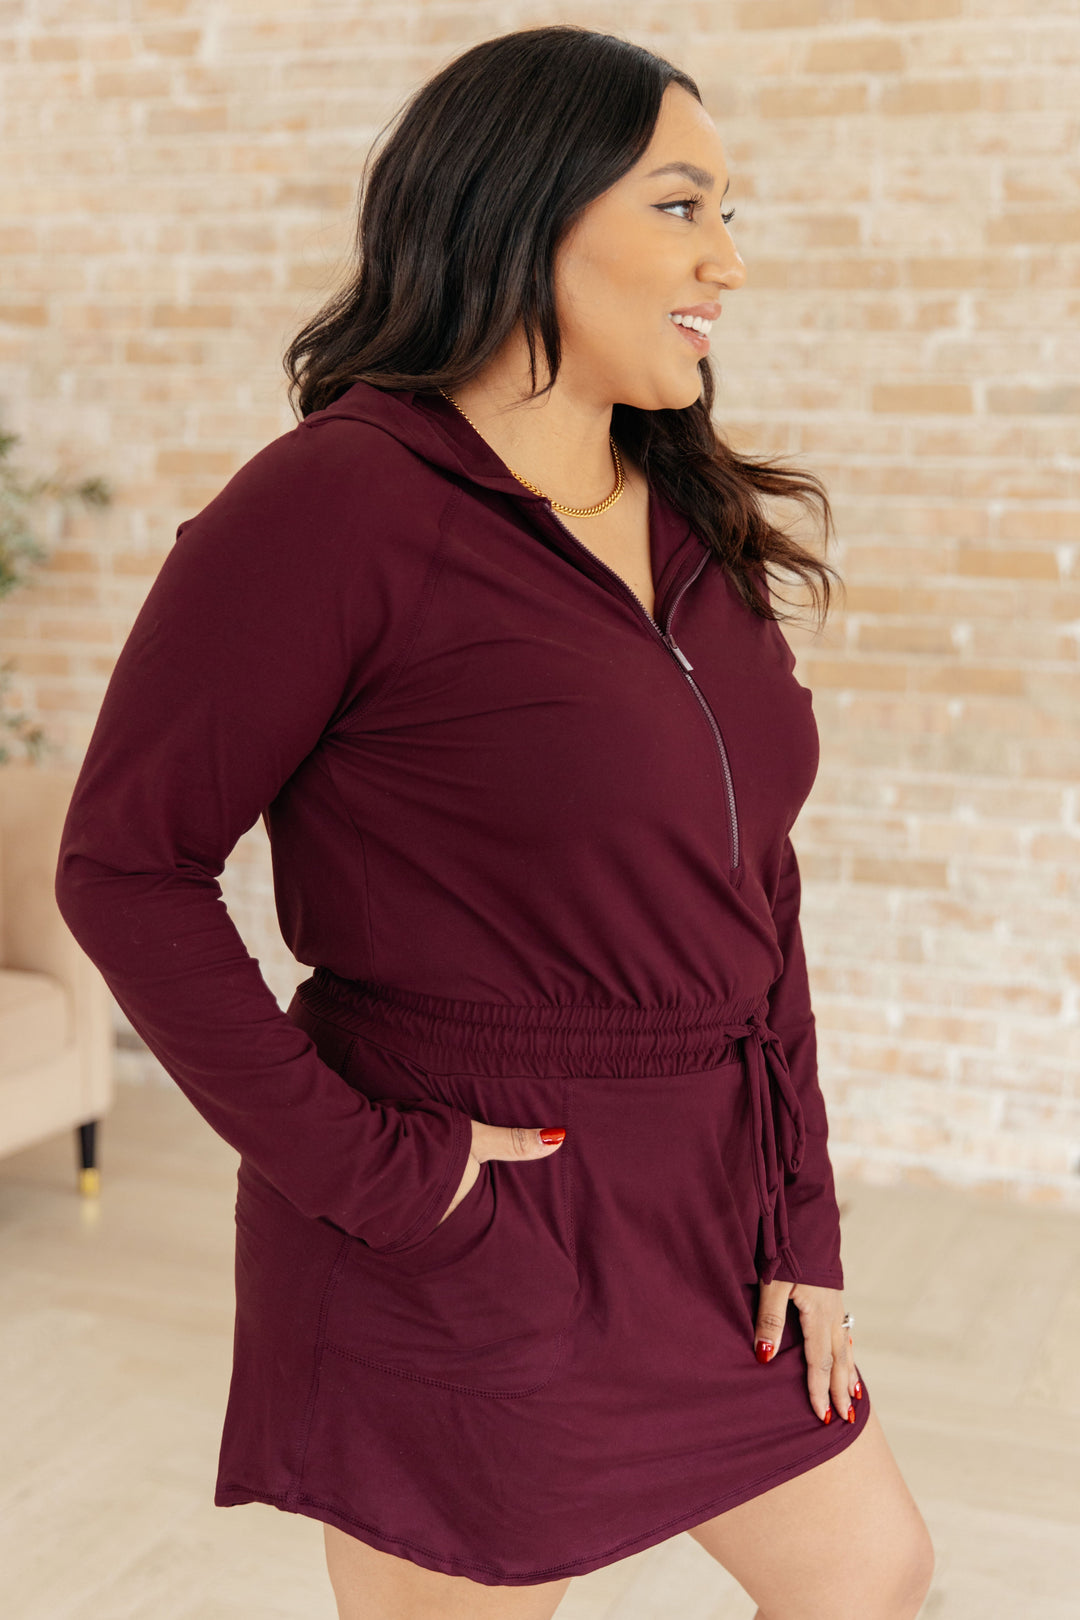 Getting Out Long Sleeve Hoodie Romper in Maroon-Sweaters/Sweatshirts-Inspired by Justeen-Women's Clothing Boutique in Chicago, Illinois